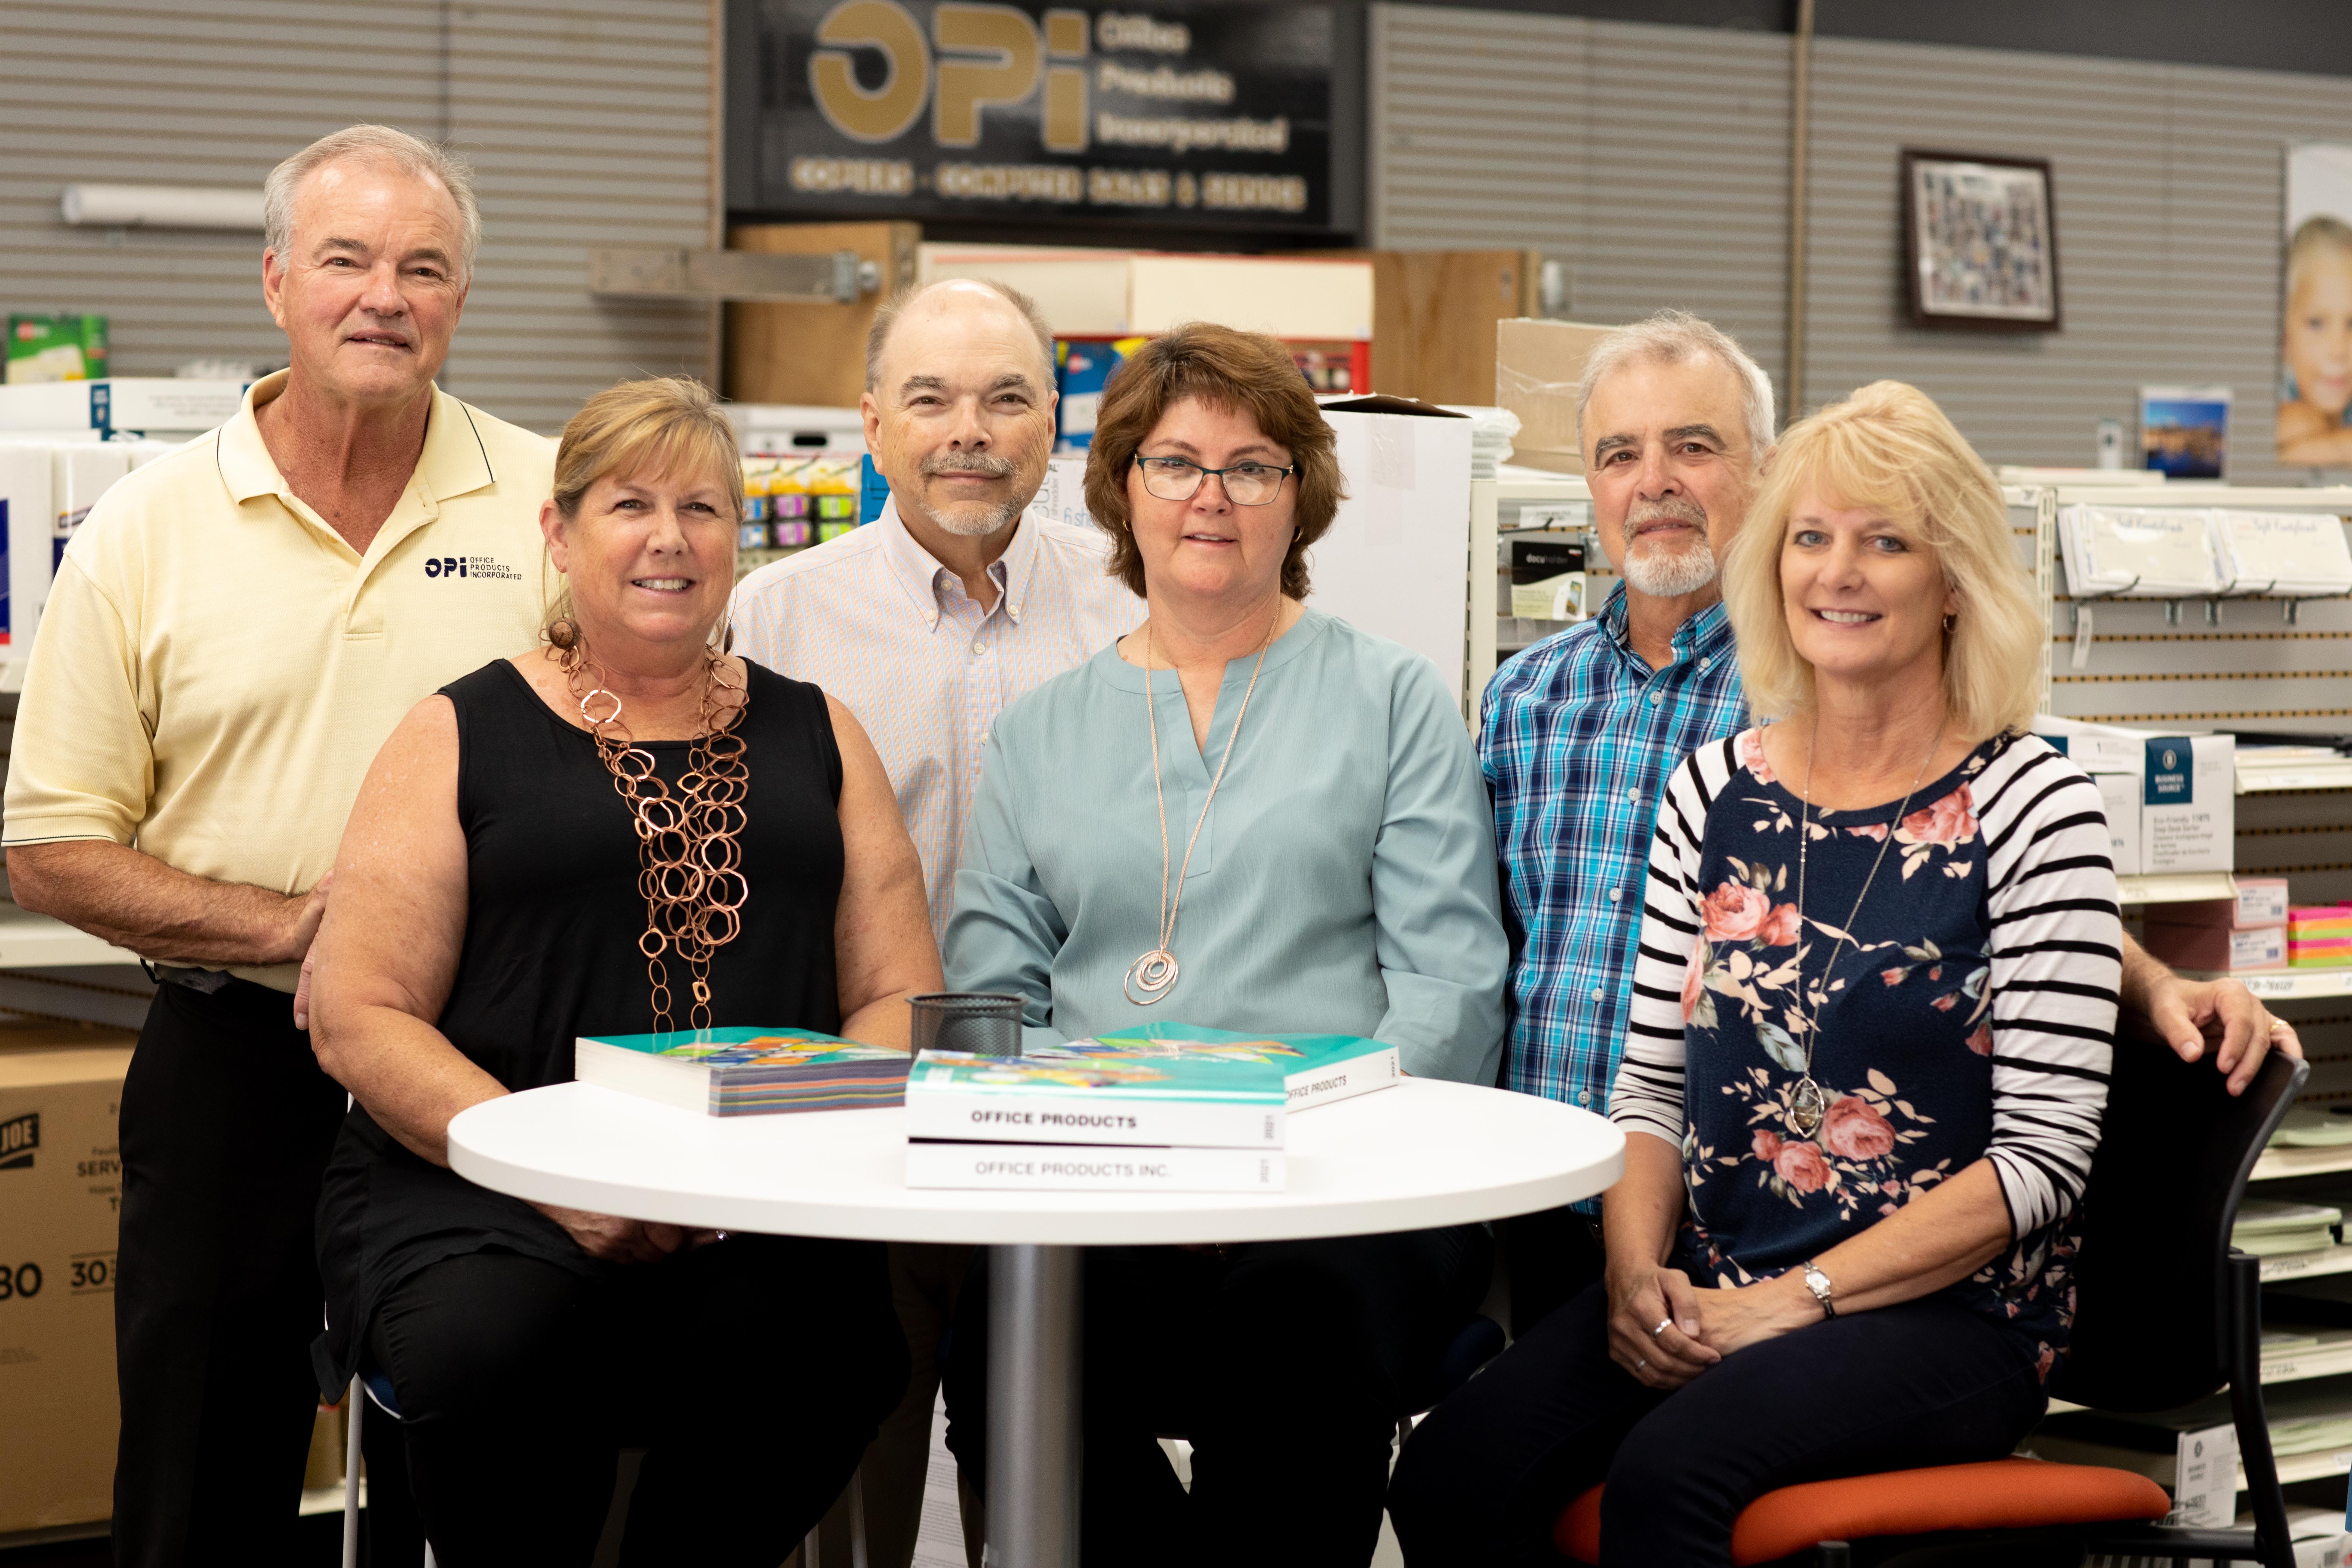 The Old Bill Honorees (from left) Craig and Kim Vink, Terry and Sandy Vink, and Kenny and Cindy Vink, pose for a photo at Office Products Incorporated (OPI). The Barton Community College Foundation chose the Vink family as the honorees at the next Big Benefit Auction for their long history of support of the college and the Foundation. The auction is set for August 28. Tickets are $45 per person and can be purchased by calling the Barton Foundation office at (620) 792-9306.